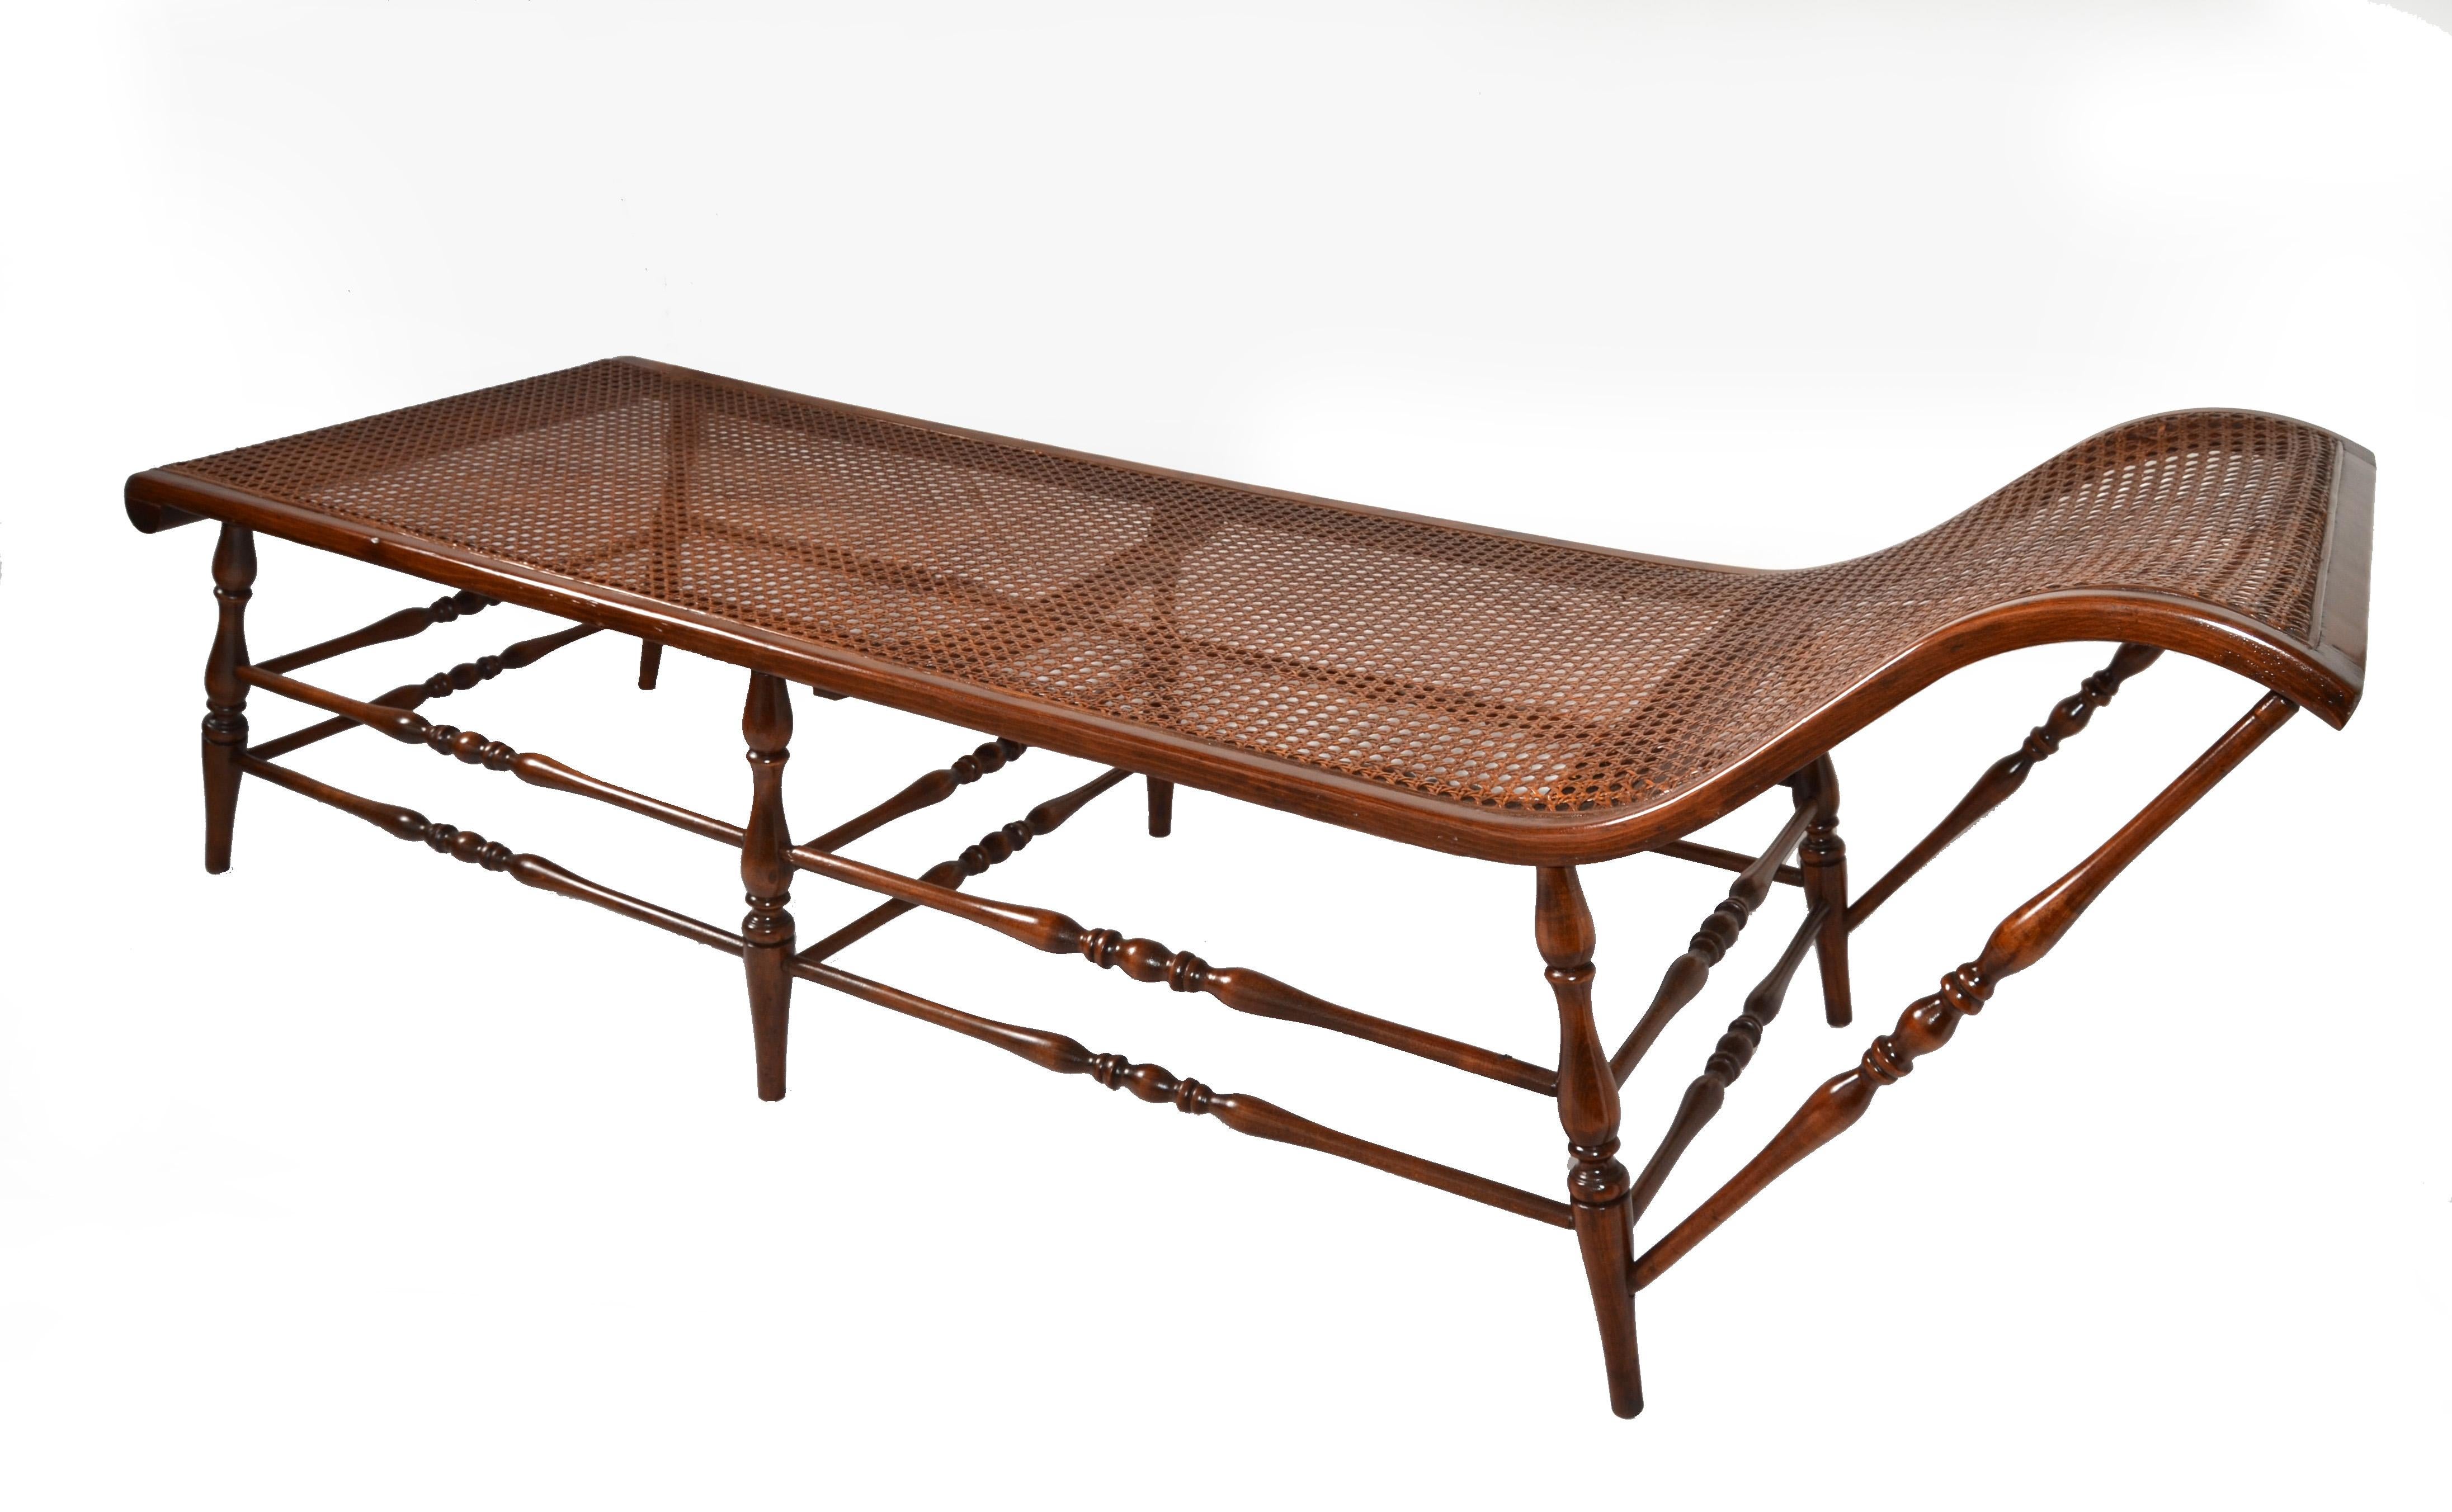 1950 refinished British Colonial handwoven Cane Chaise Lounge, Daybed or Sofa with turned Wood Frame and support Stretchers in brown Finish.
Bohemian Chic Style with a graceful form handmade turned spindle construction, caned seat and head part.